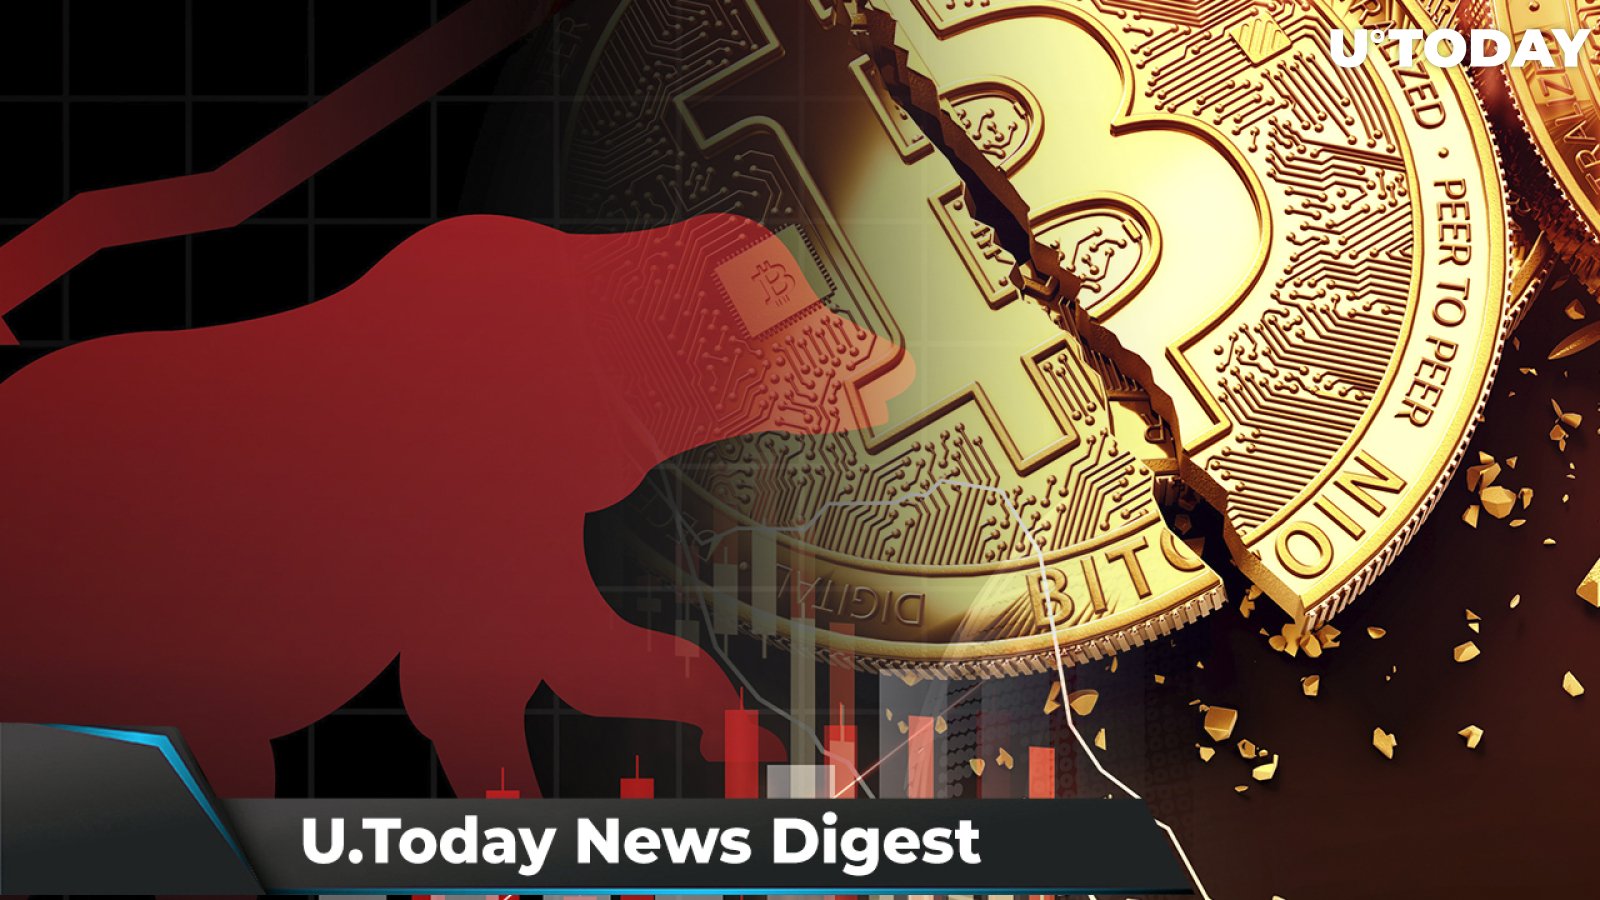 BTC Drops to $40,600, SHIB Holders Can Now Earn Interest, Crypto Enters Bear Market: Crypto News Digest by U.Today